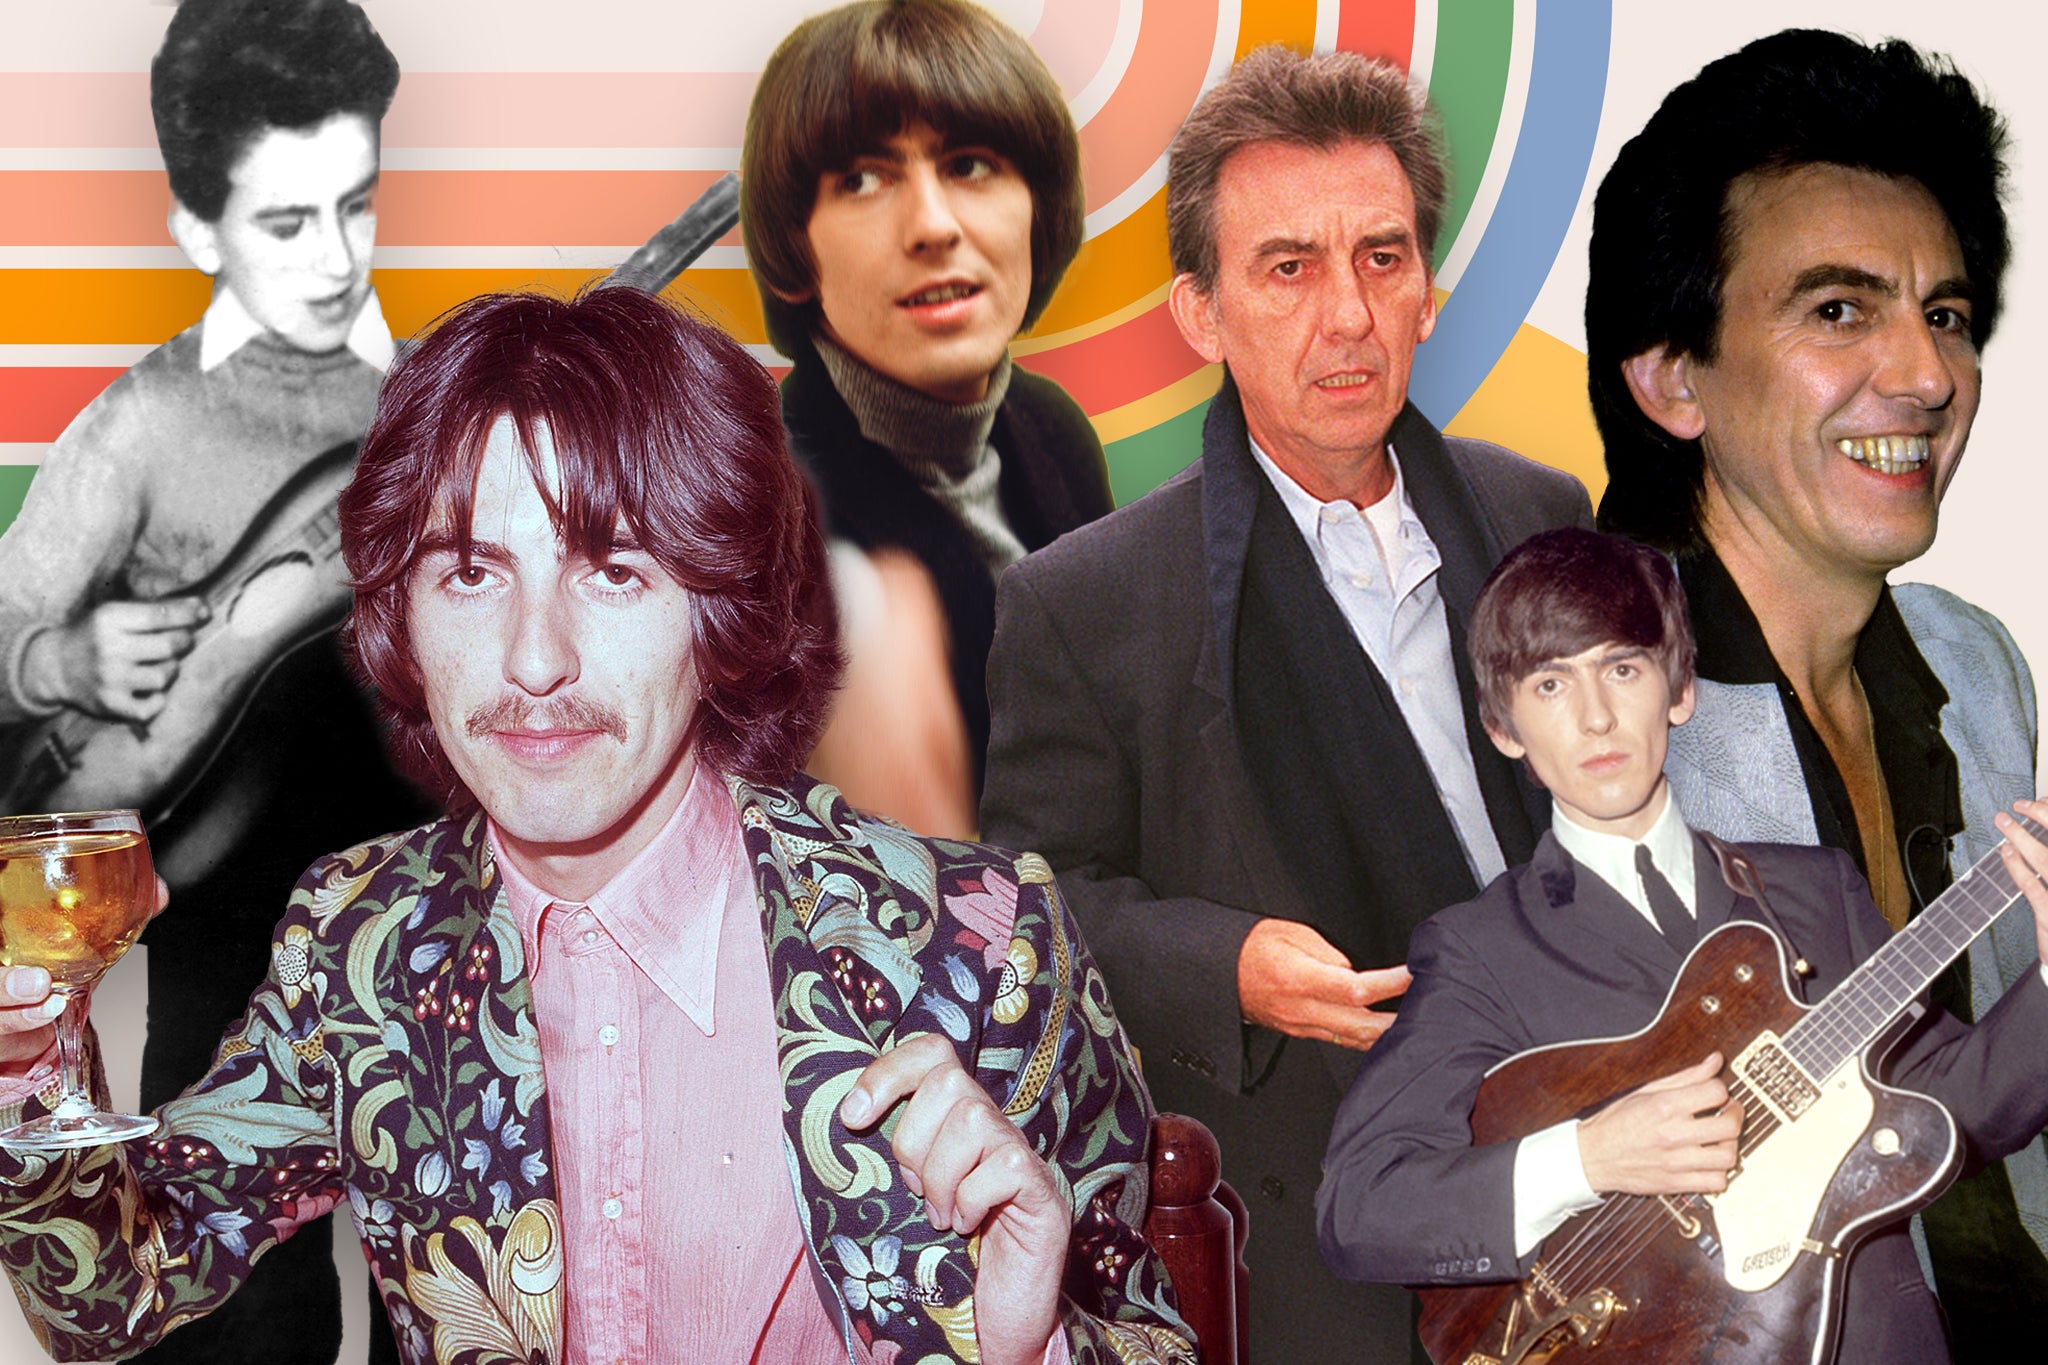 Think for yourself: the book documents Harrison’s creative struggles during his Beatles career